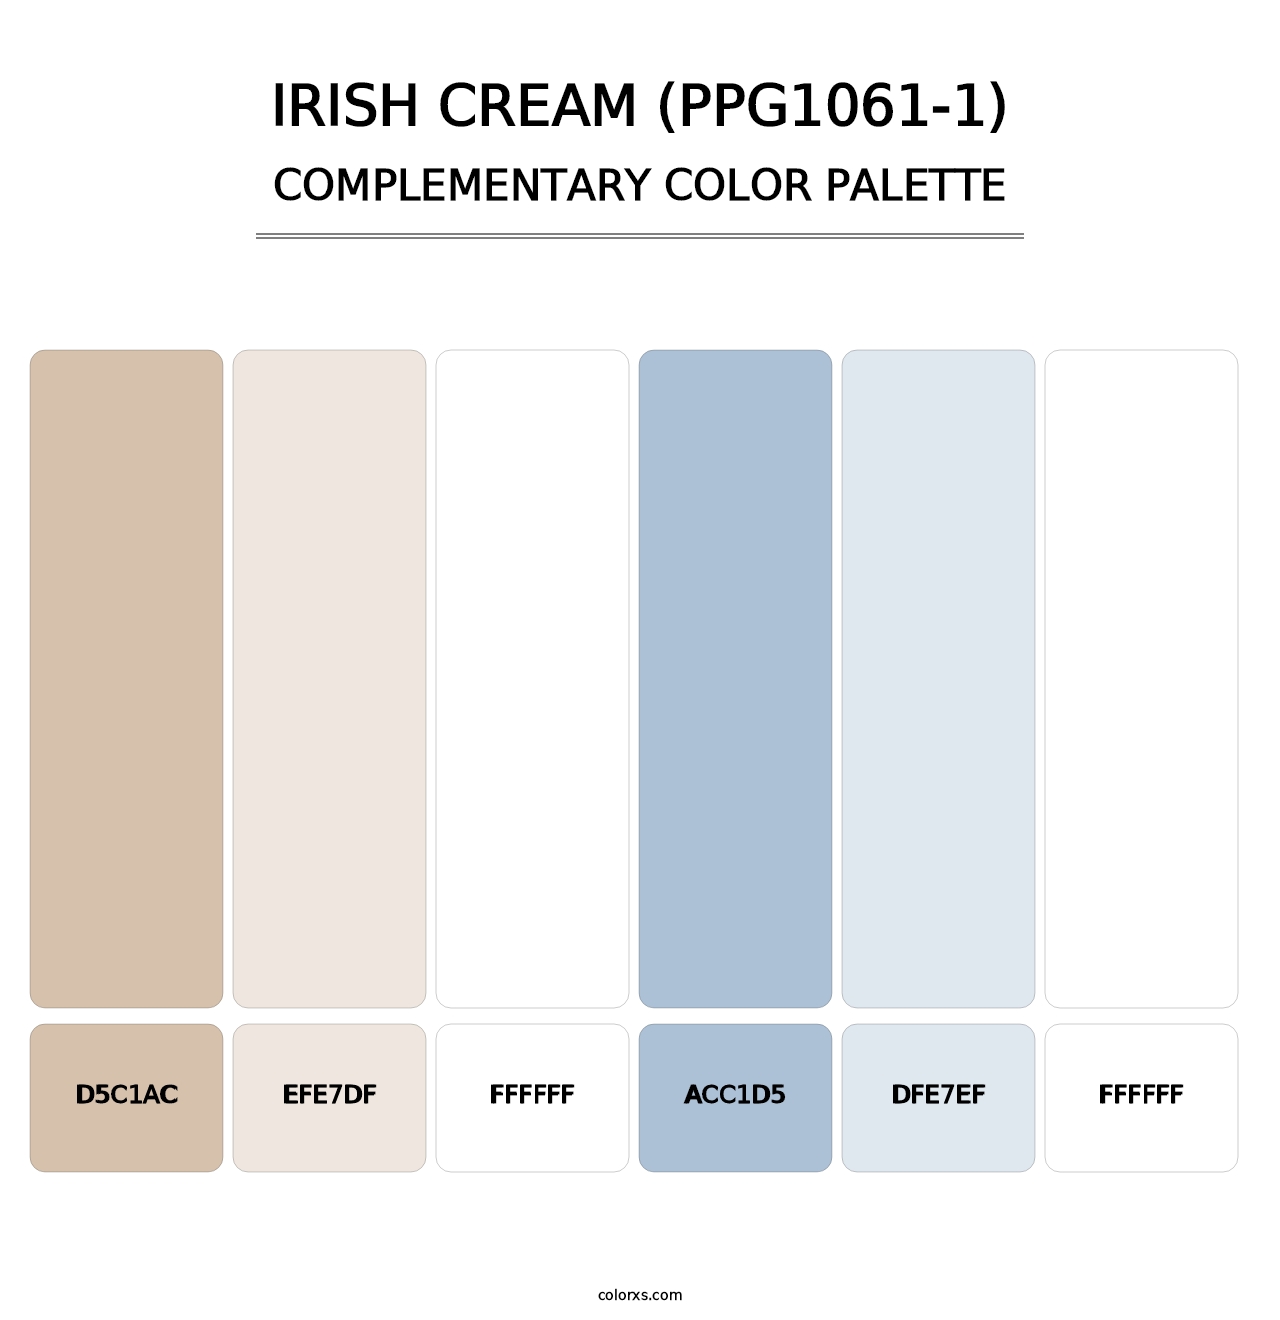 Irish Cream (PPG1061-1) - Complementary Color Palette